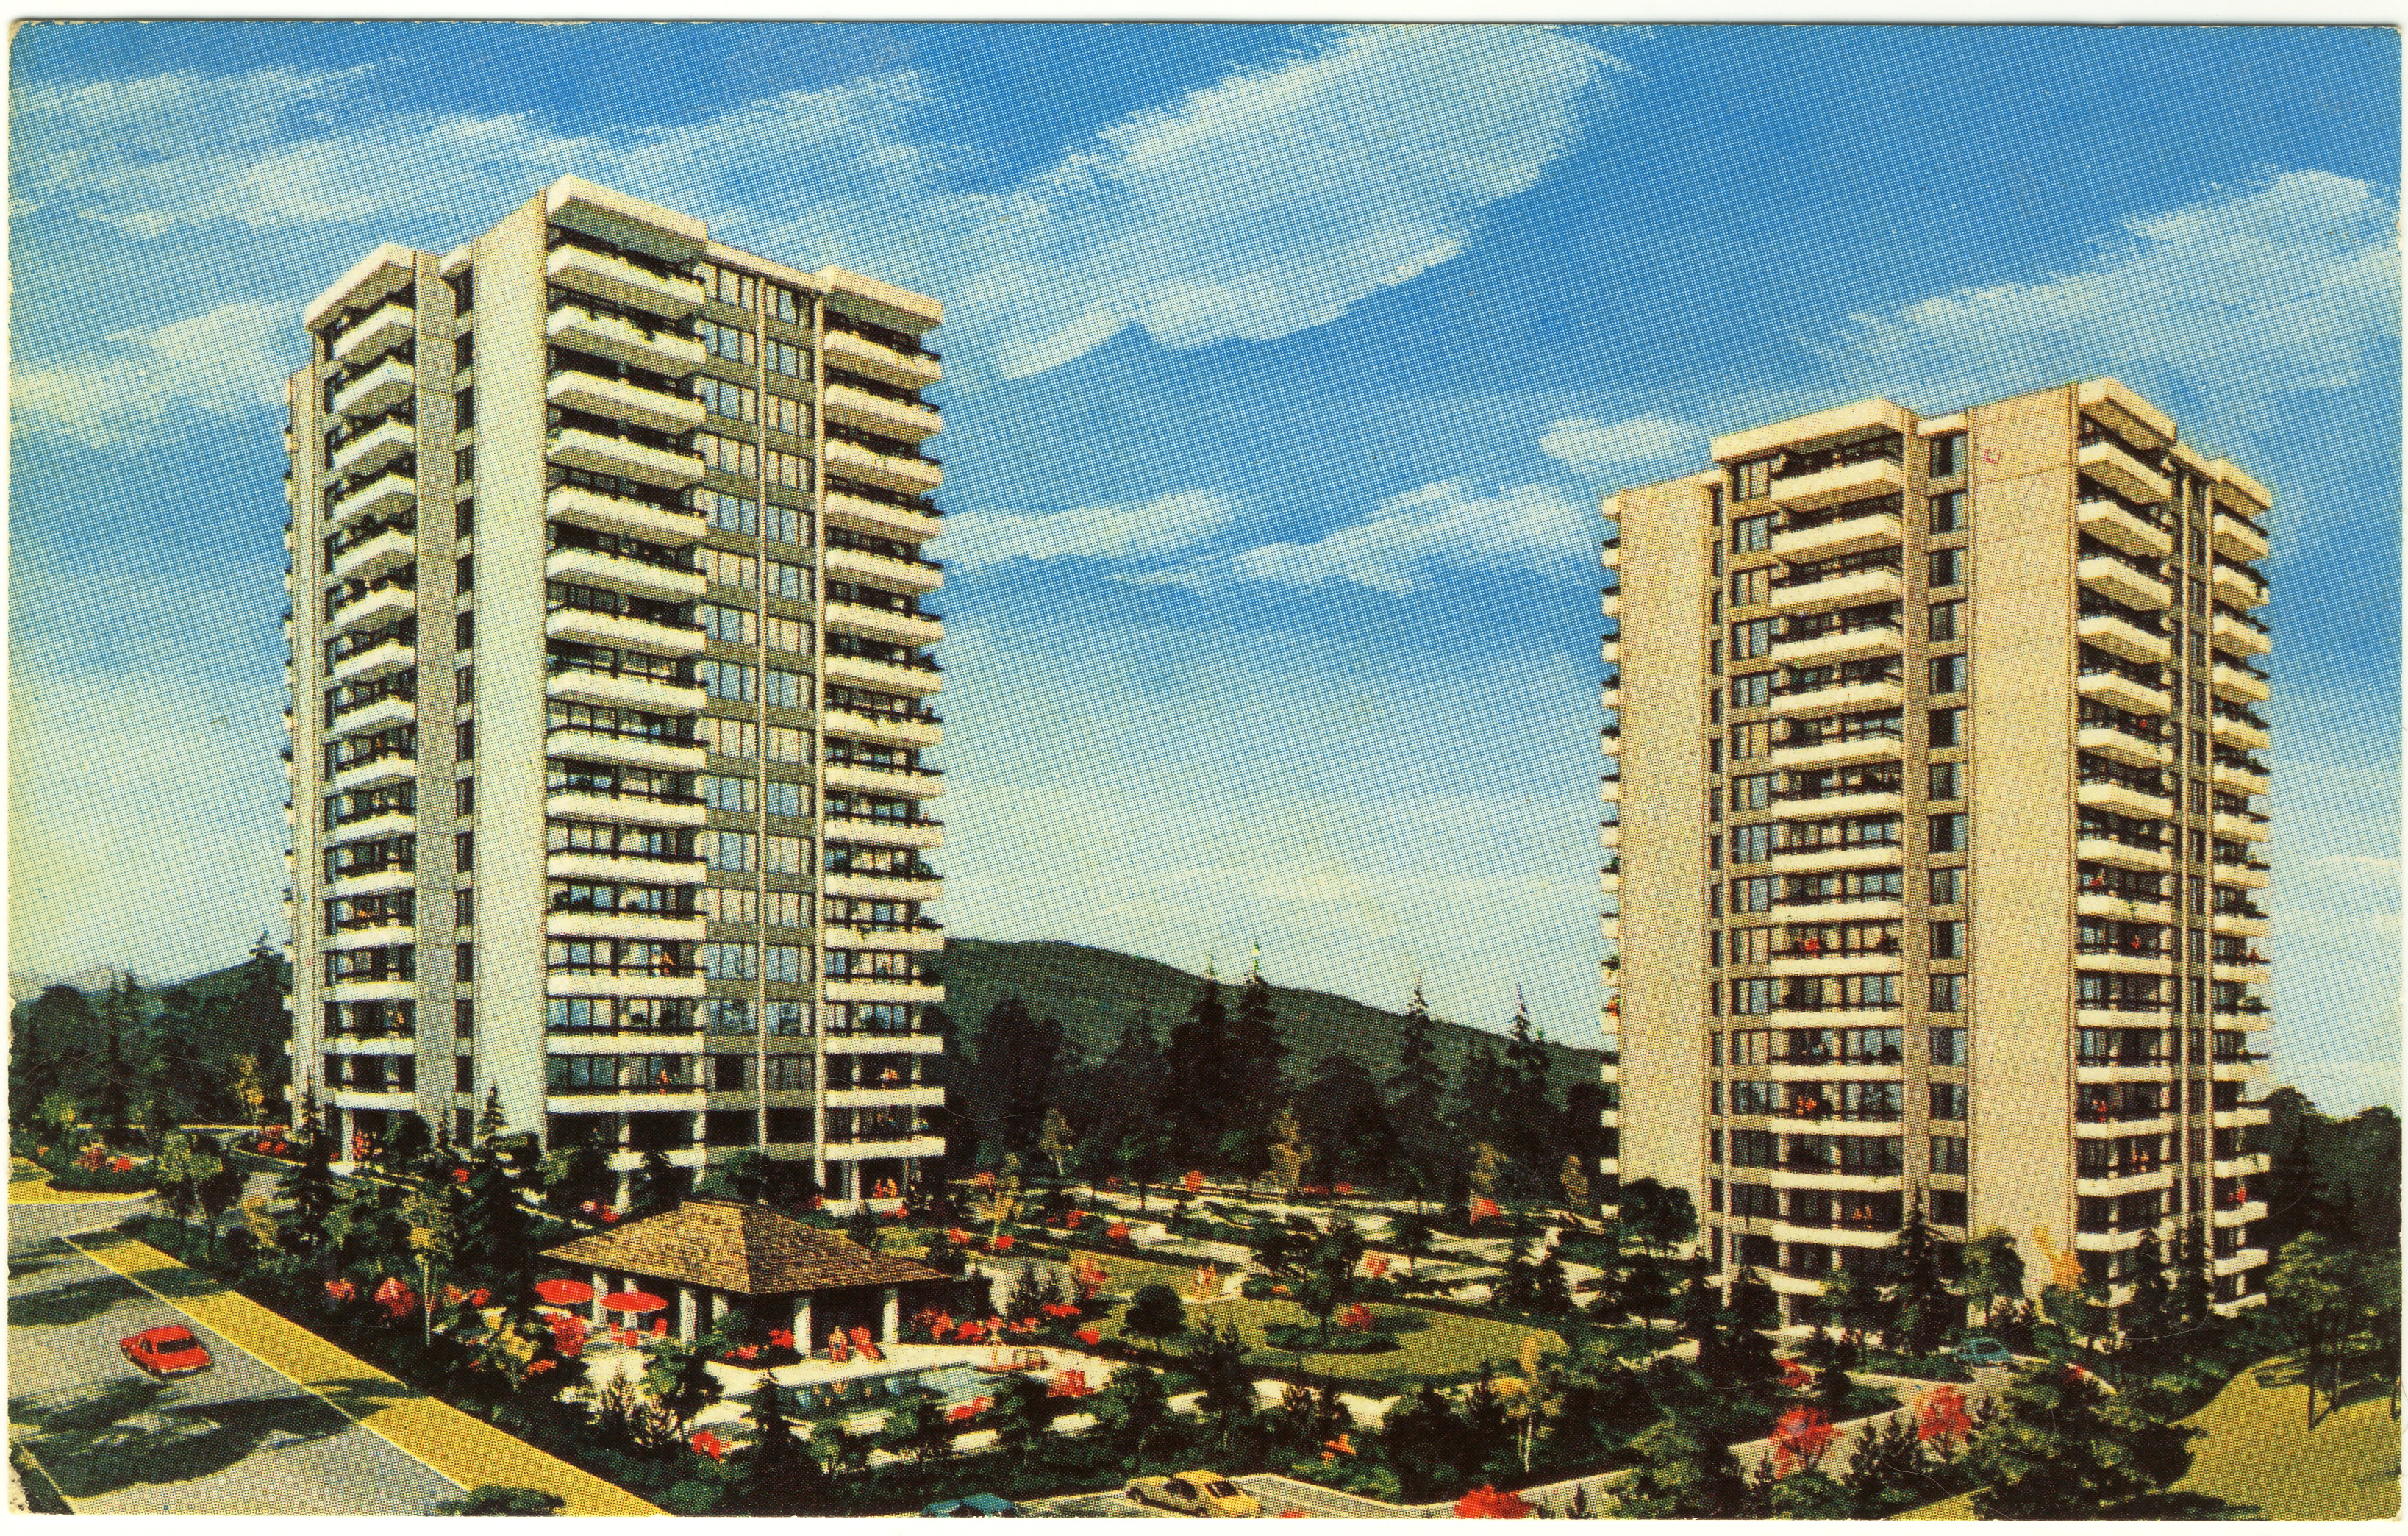 Vantage Point apartment towers, Burnaby, BC. Advertising postcard.